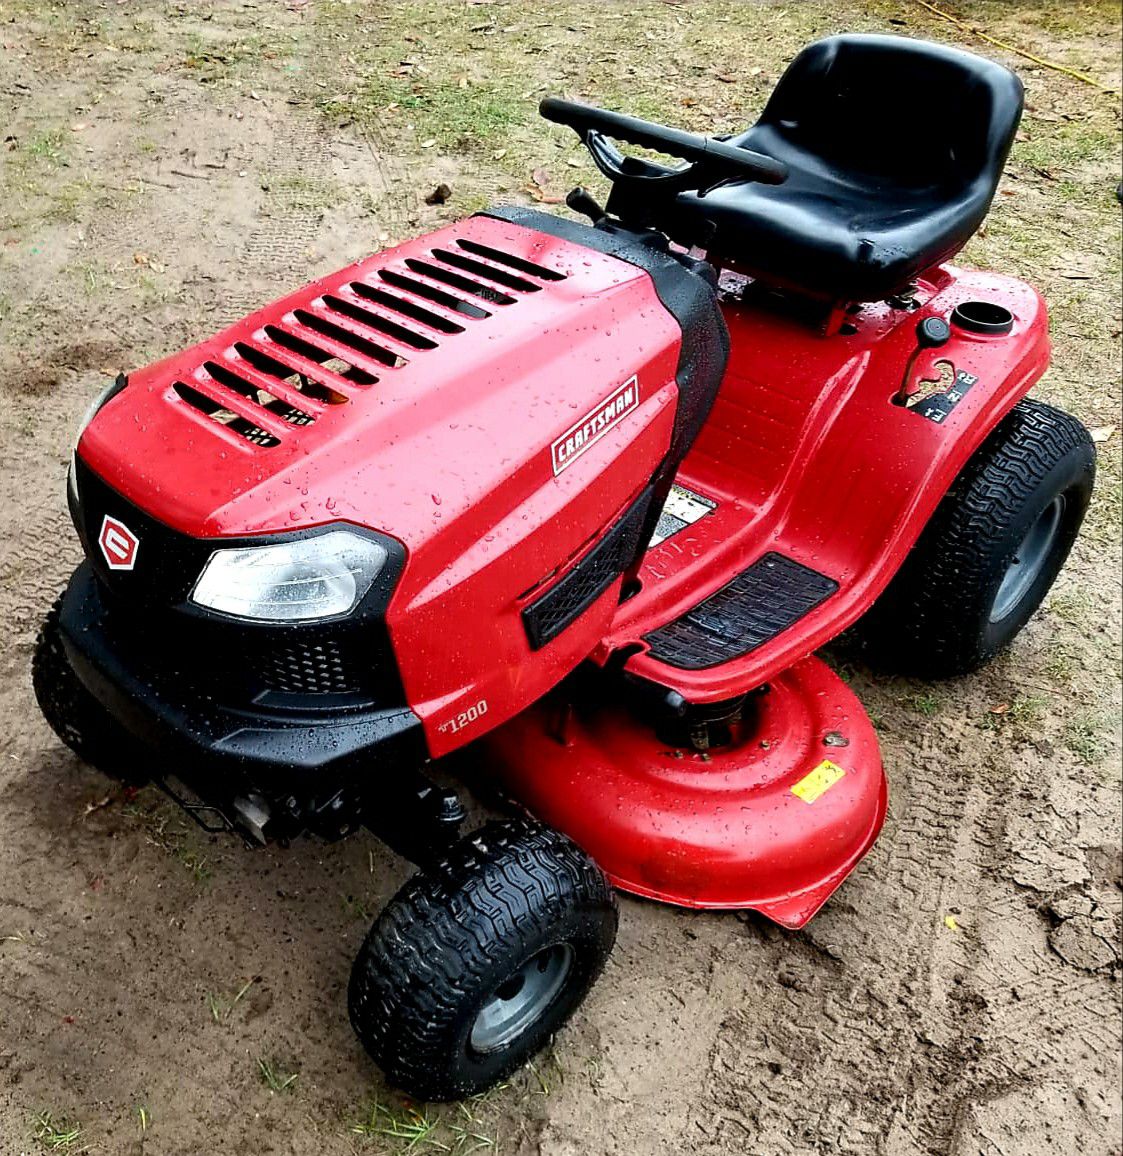 CraftsMan T1200 Riding Lawn mower Tractor 42 inch